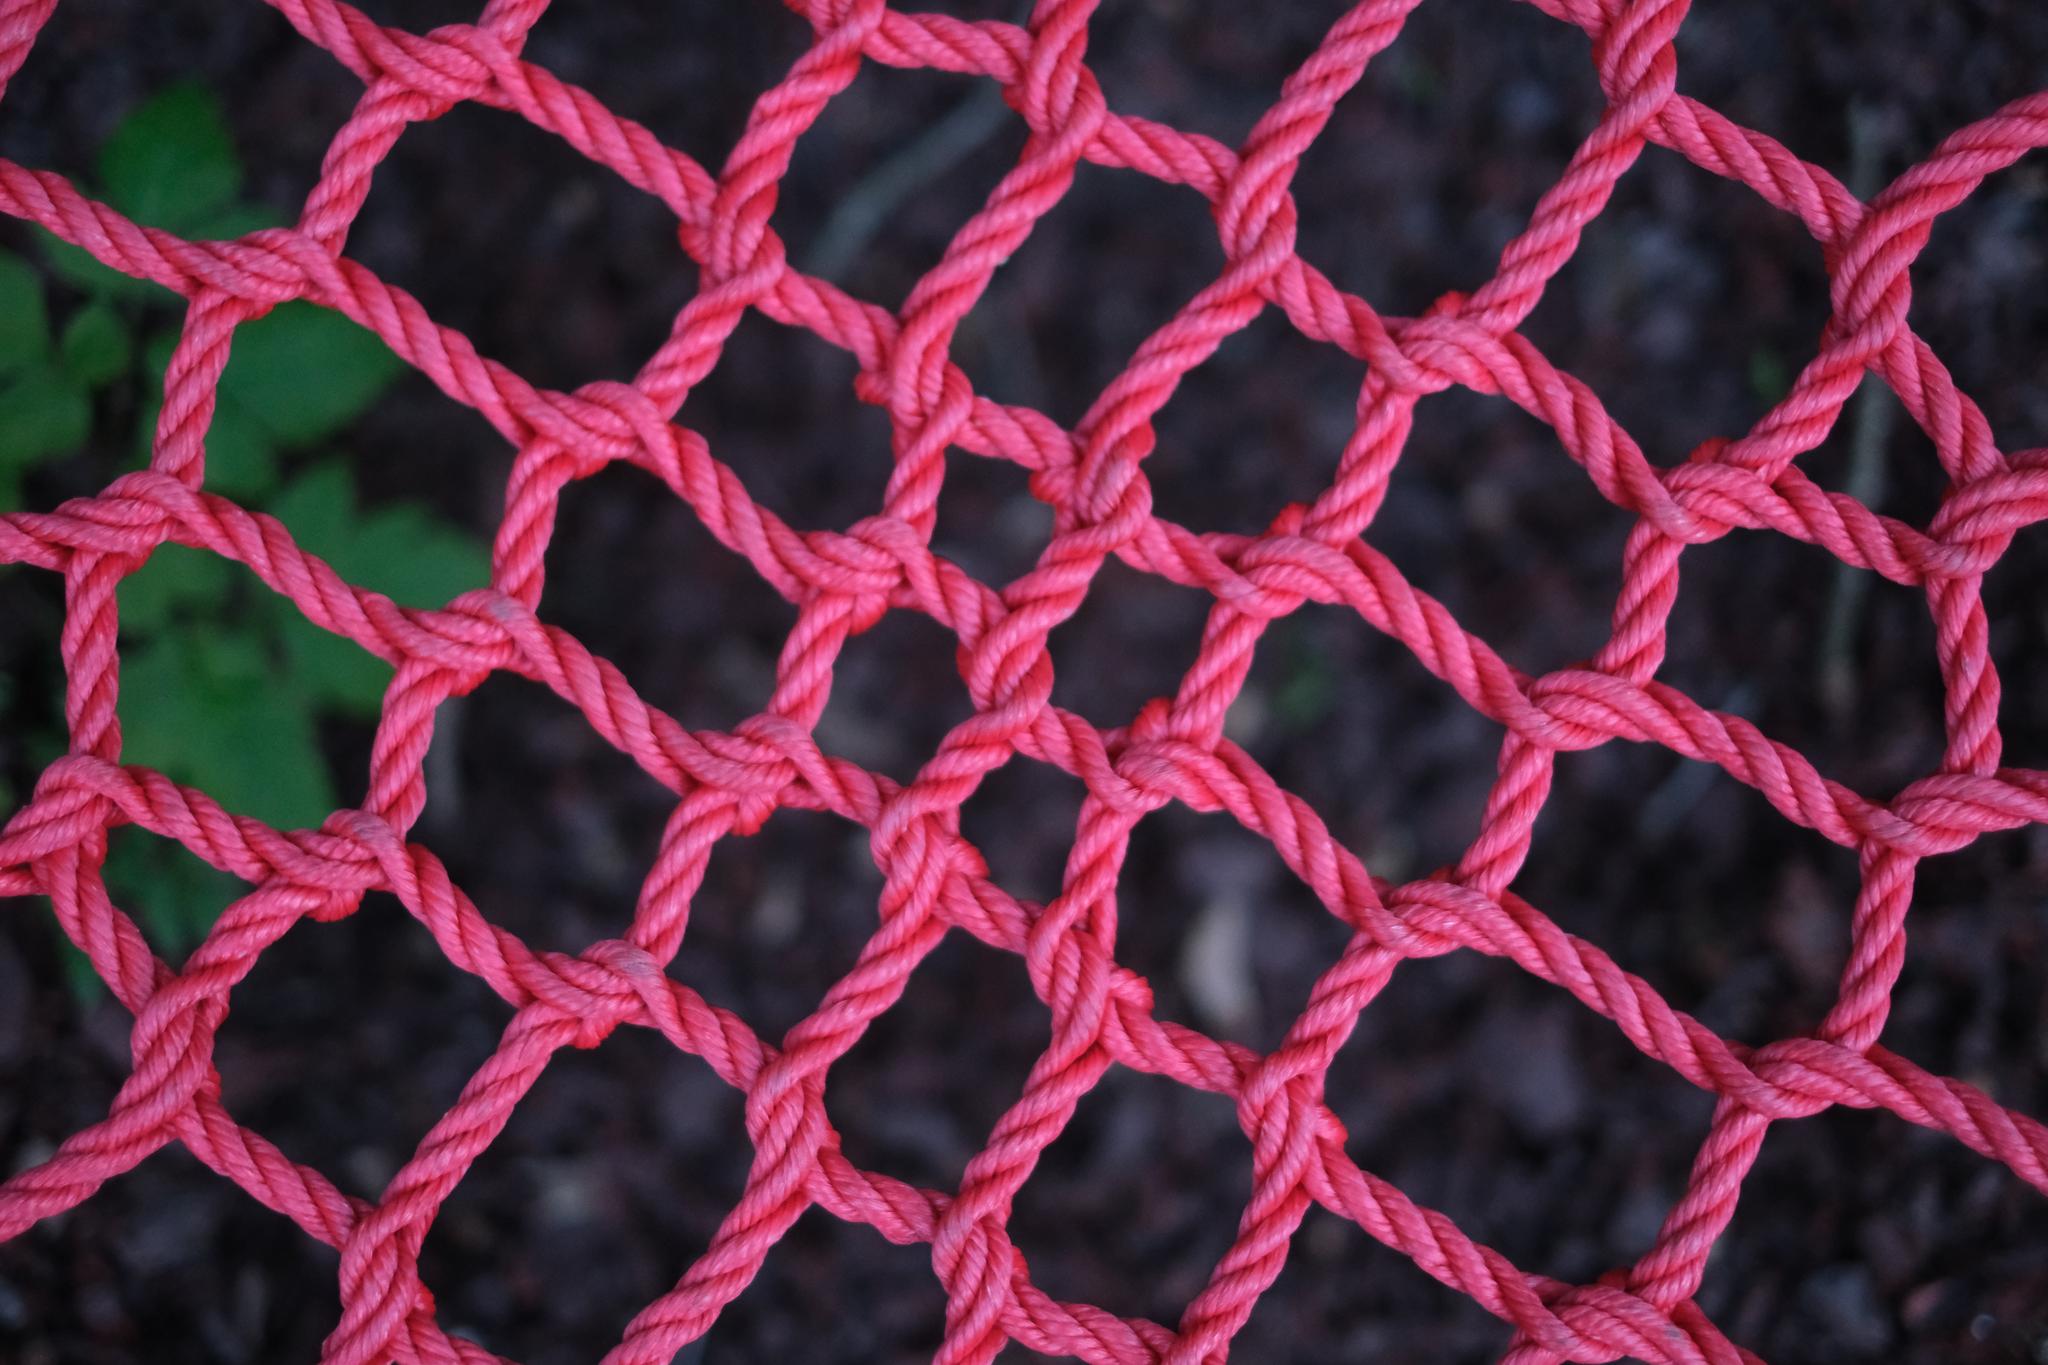 A close-up of a pink net structure against a blurred green and black background